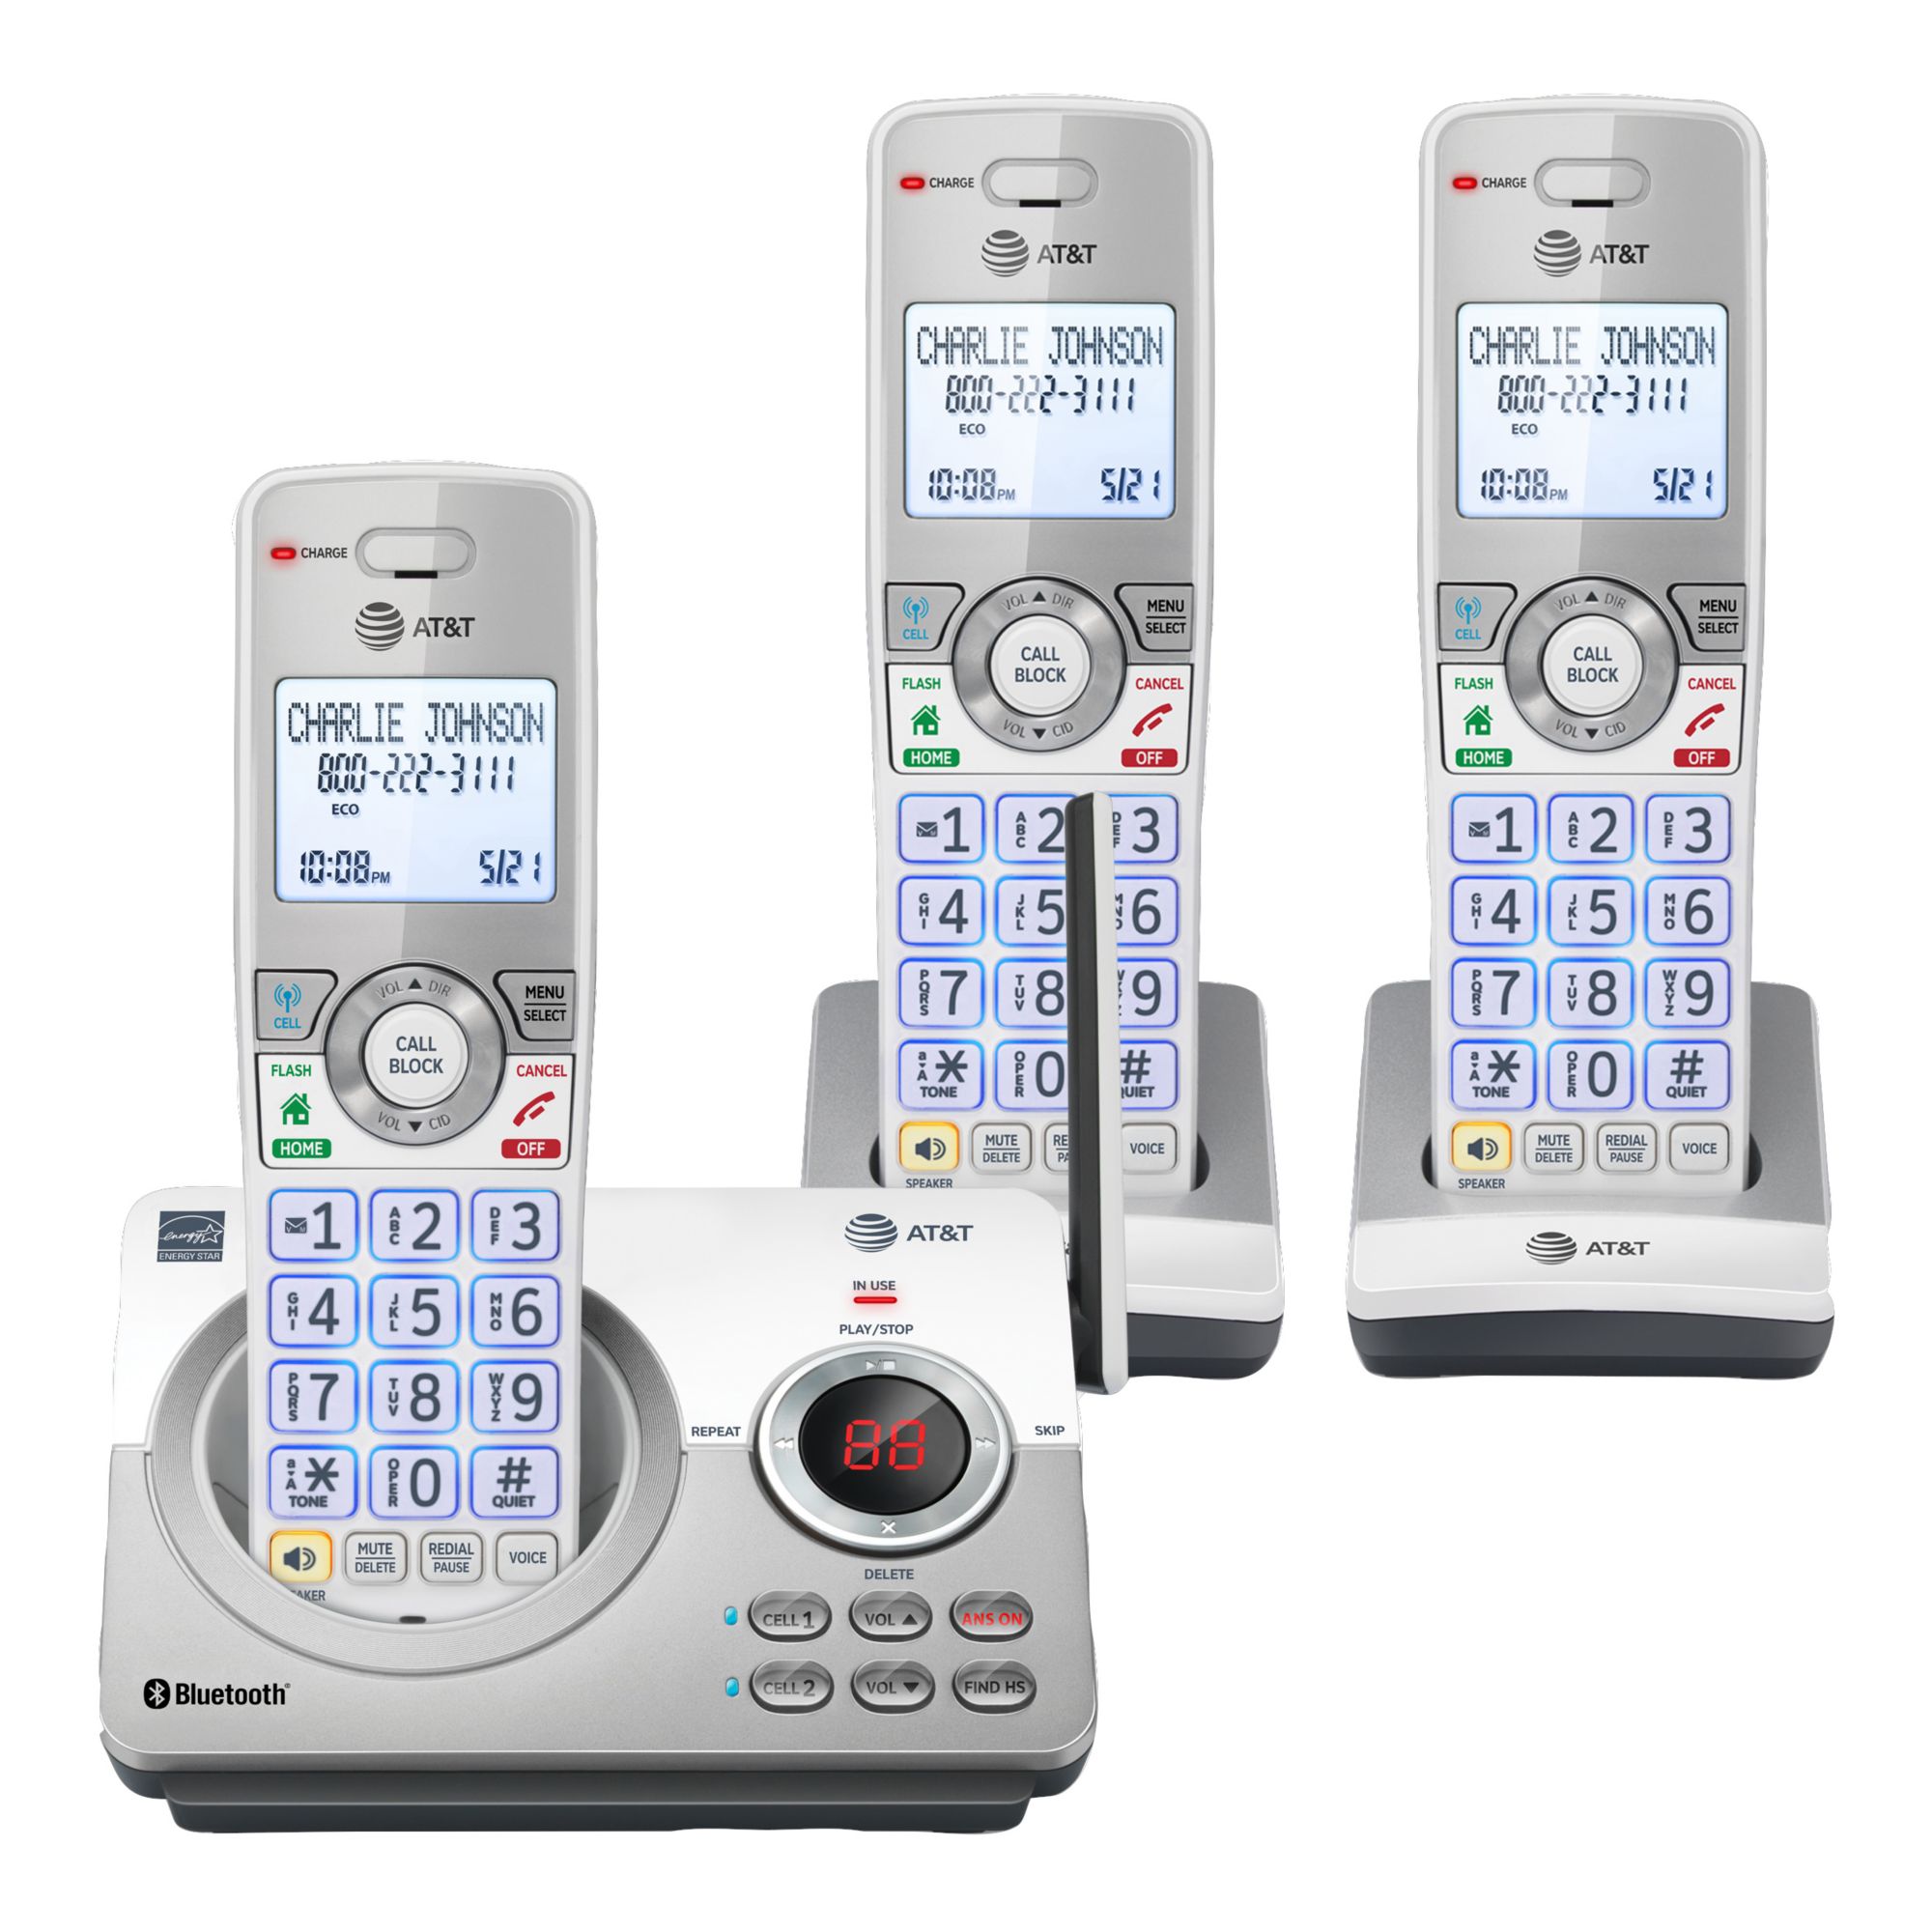 Expandable Cordless Phone Telephone With Lcd Display Caller Id